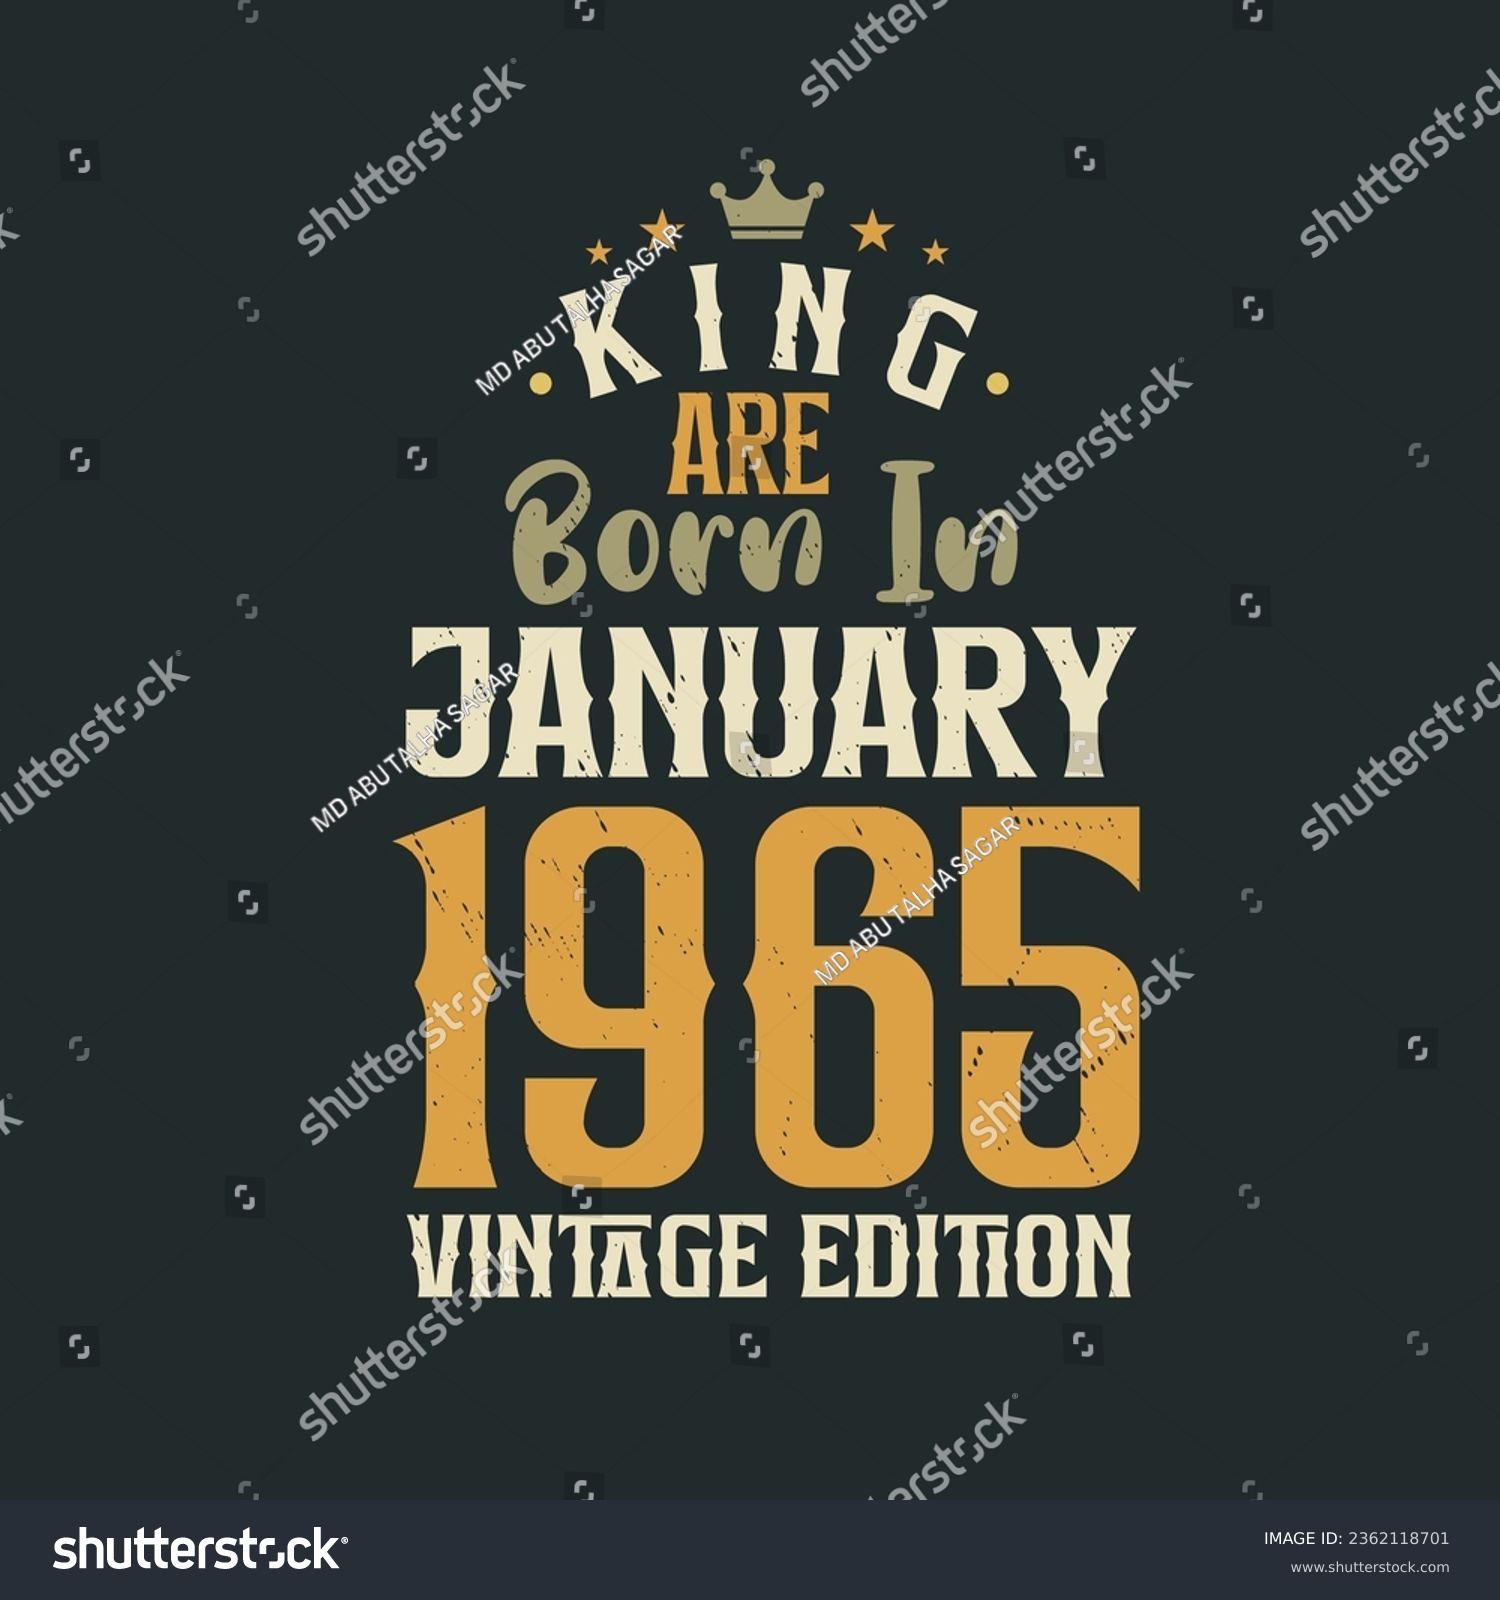 SVG of King are born in January 1965 Vintage edition. King are born in January 1965 Retro Vintage Birthday Vintage edition svg